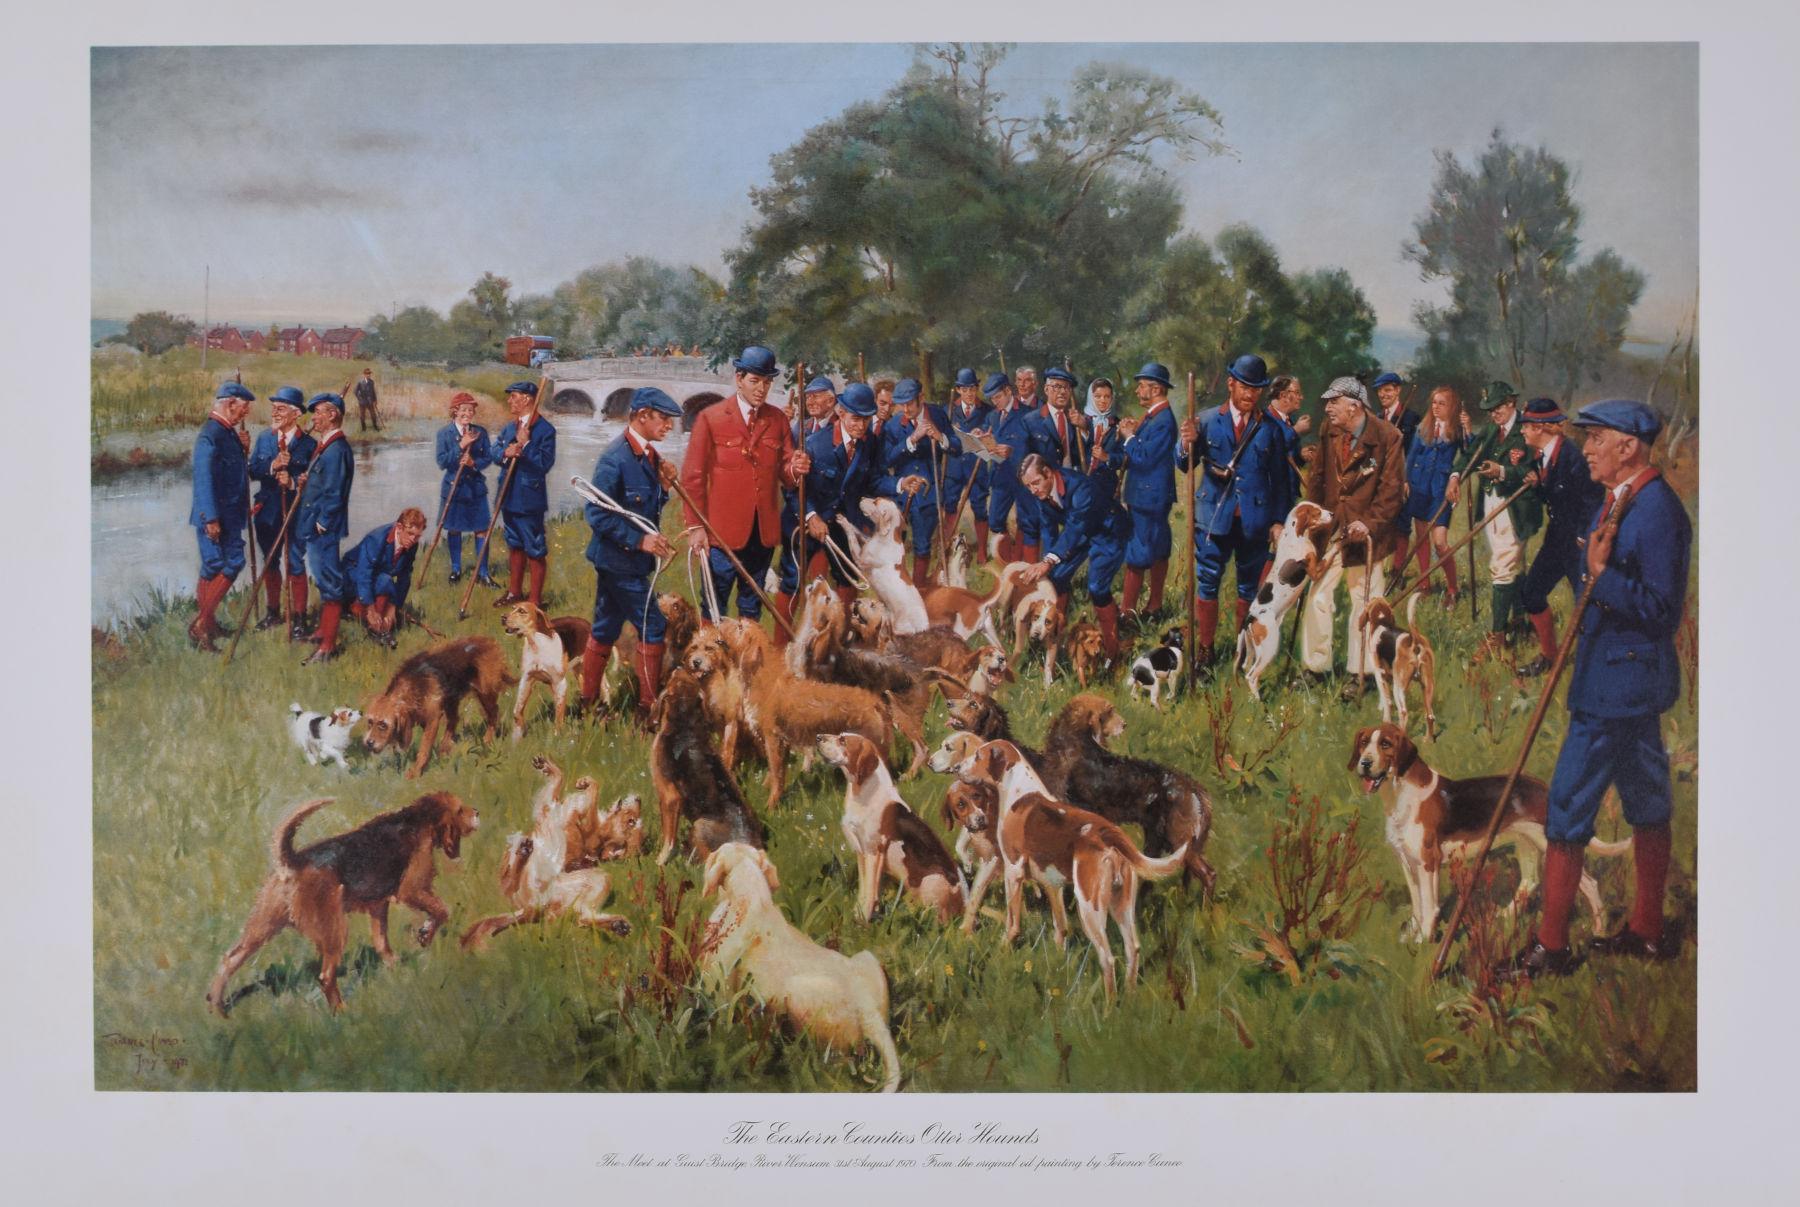 To see our other hunting pictures, scroll down to "More from this Seller" and below it click on "See all from this Seller" and then search.

Terrence Cuneo (1907 - 1996)
Eastern Counties Otter Hounds (1971)
Lithograph
56 x 80 cm 

The meet at Guist